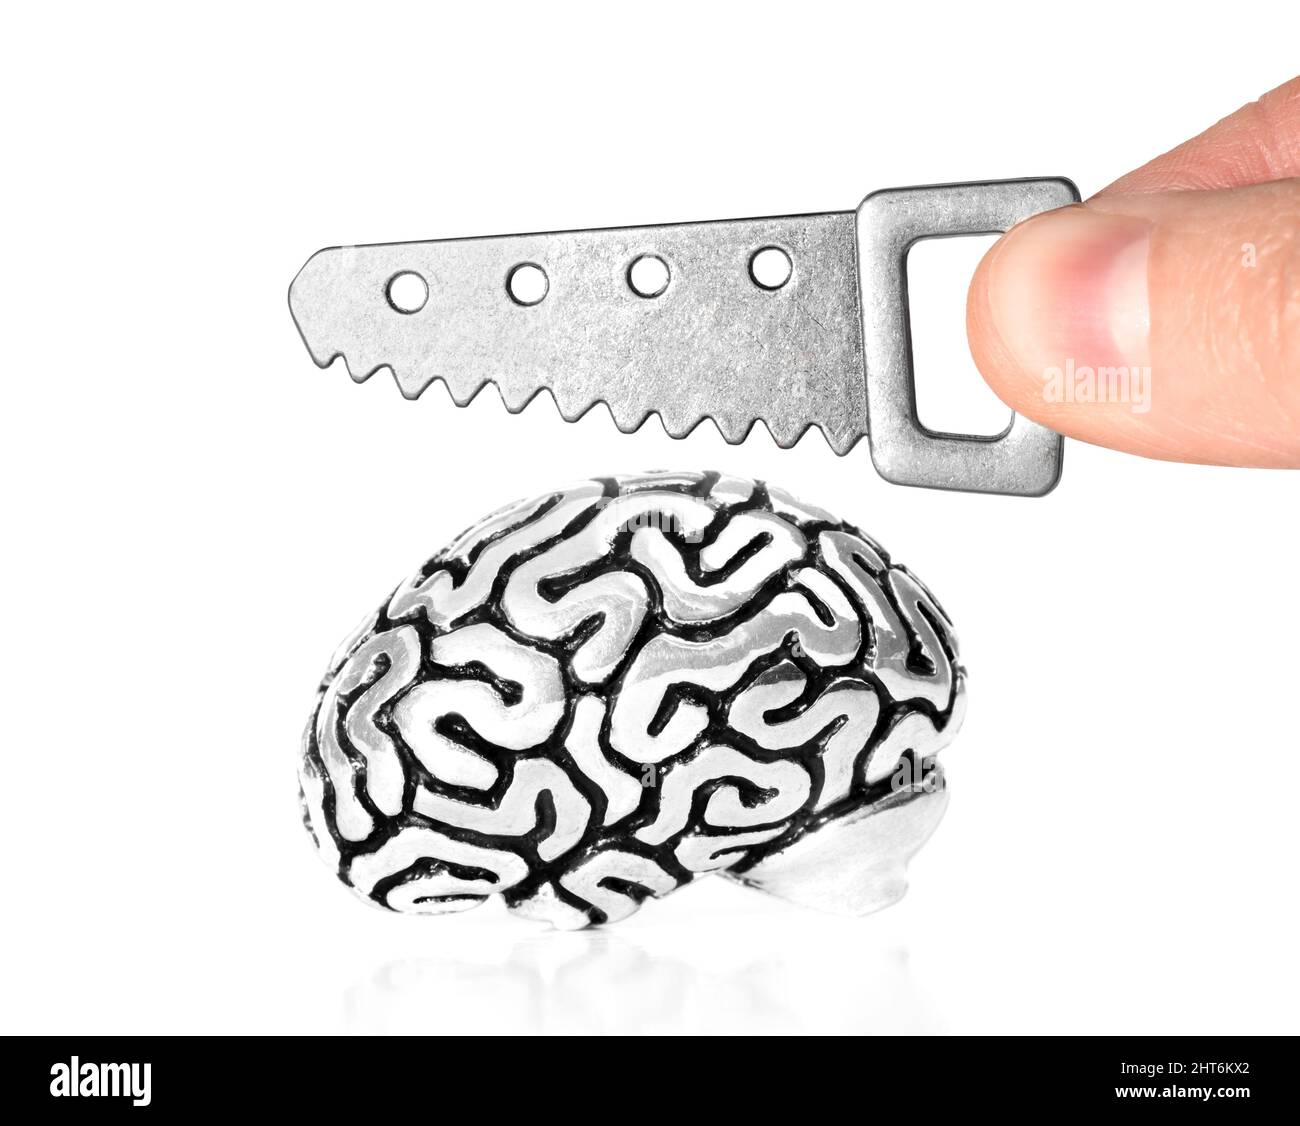 Sawing a miniature anatomical copy of a human brain with a small saw isolated on white background. Relationship difficulties concept. Stock Photo